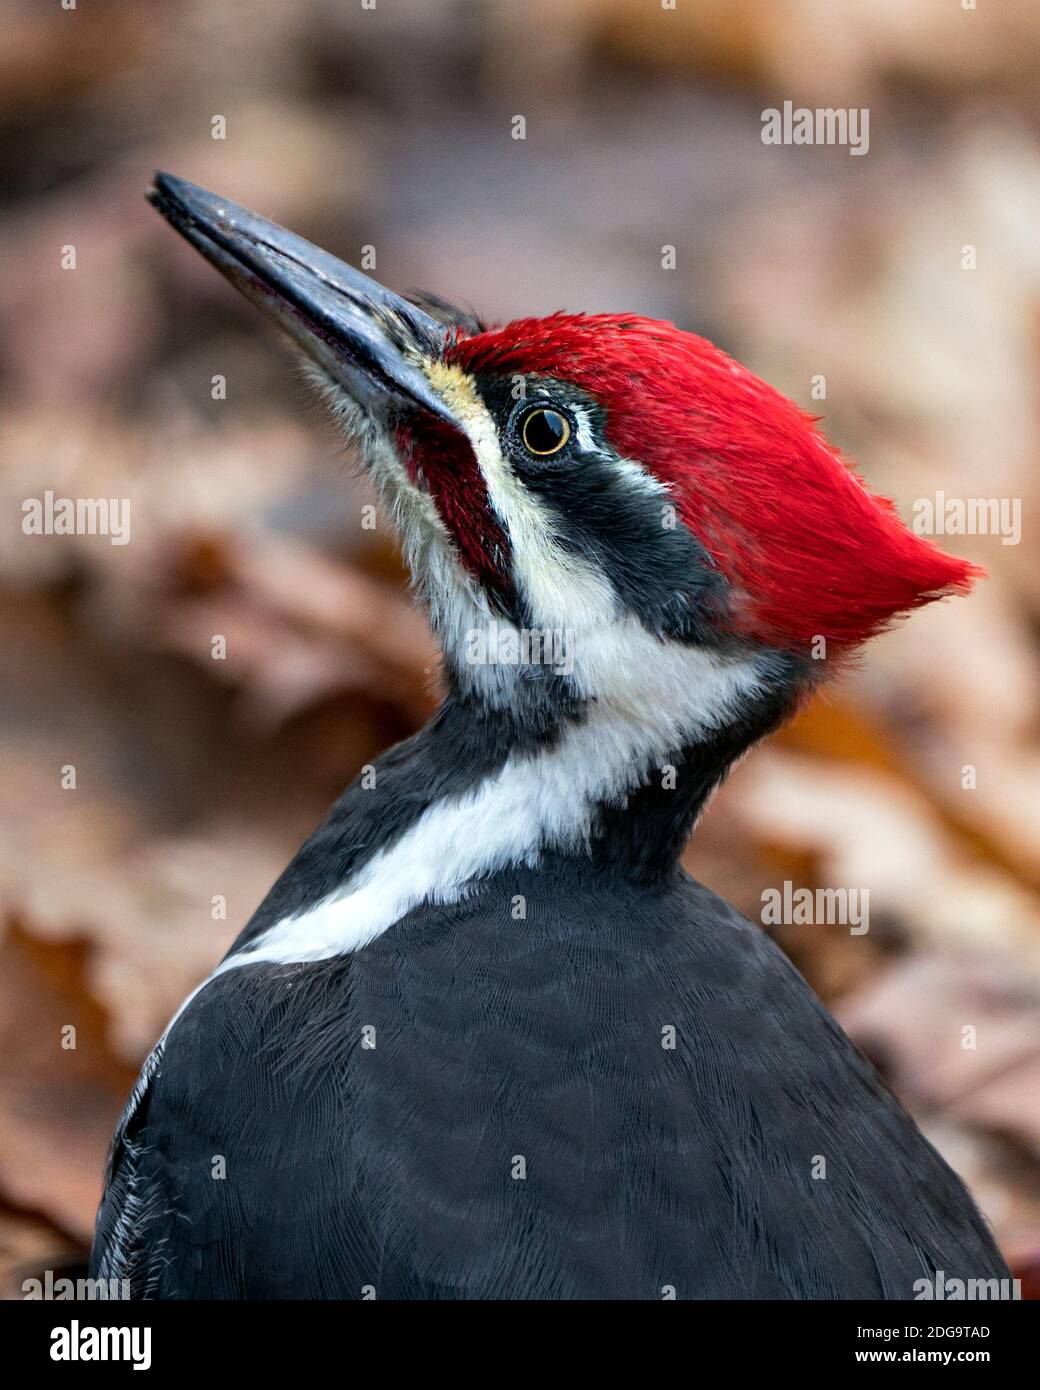 Woodpecker head shot close-up profile view with a blur background in its environment and habitat with a side view. Stock Photo